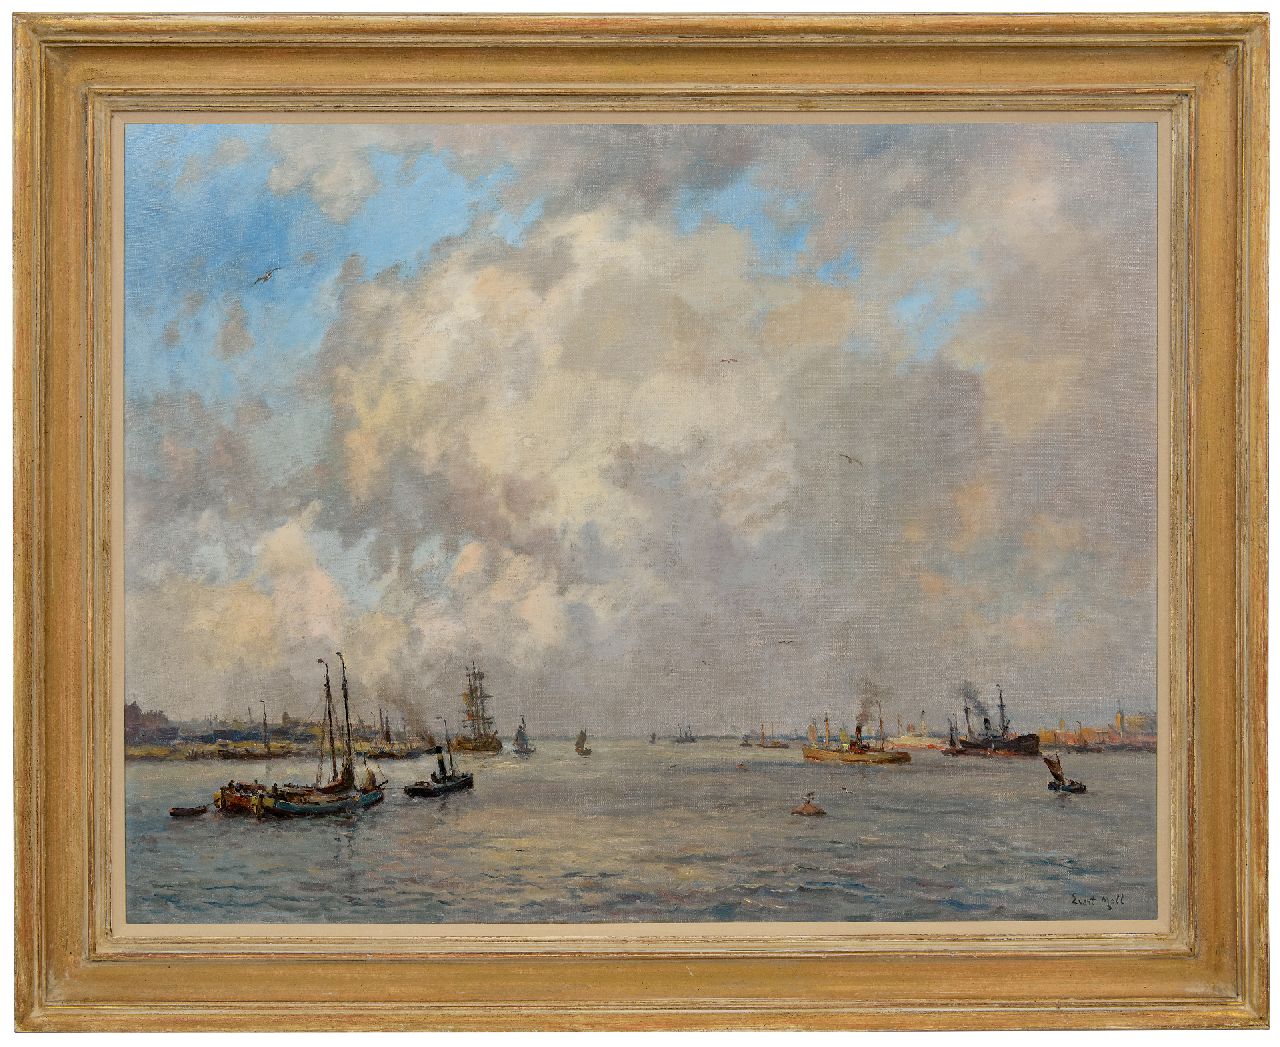 Moll E.  | Evert Moll | Paintings offered for sale | Navigation under a high cloudy sky, oil on canvas 72.2 x 92.7 cm, signed l.r.